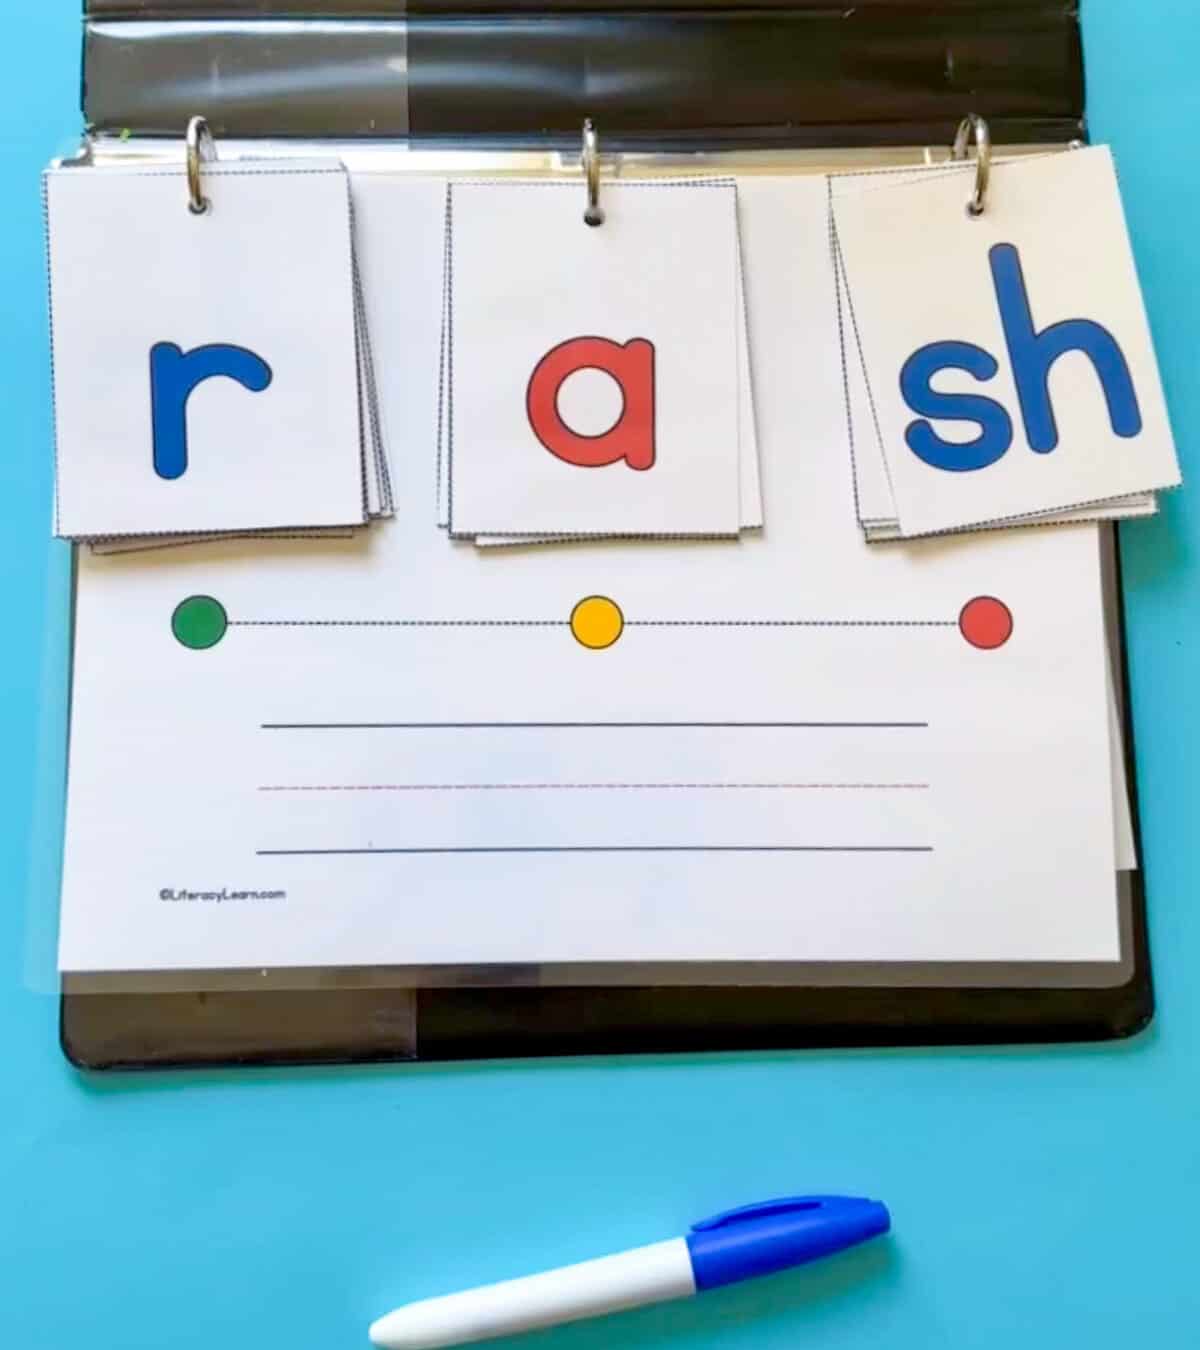 A blending board with grapheme cards that make the word "rash."